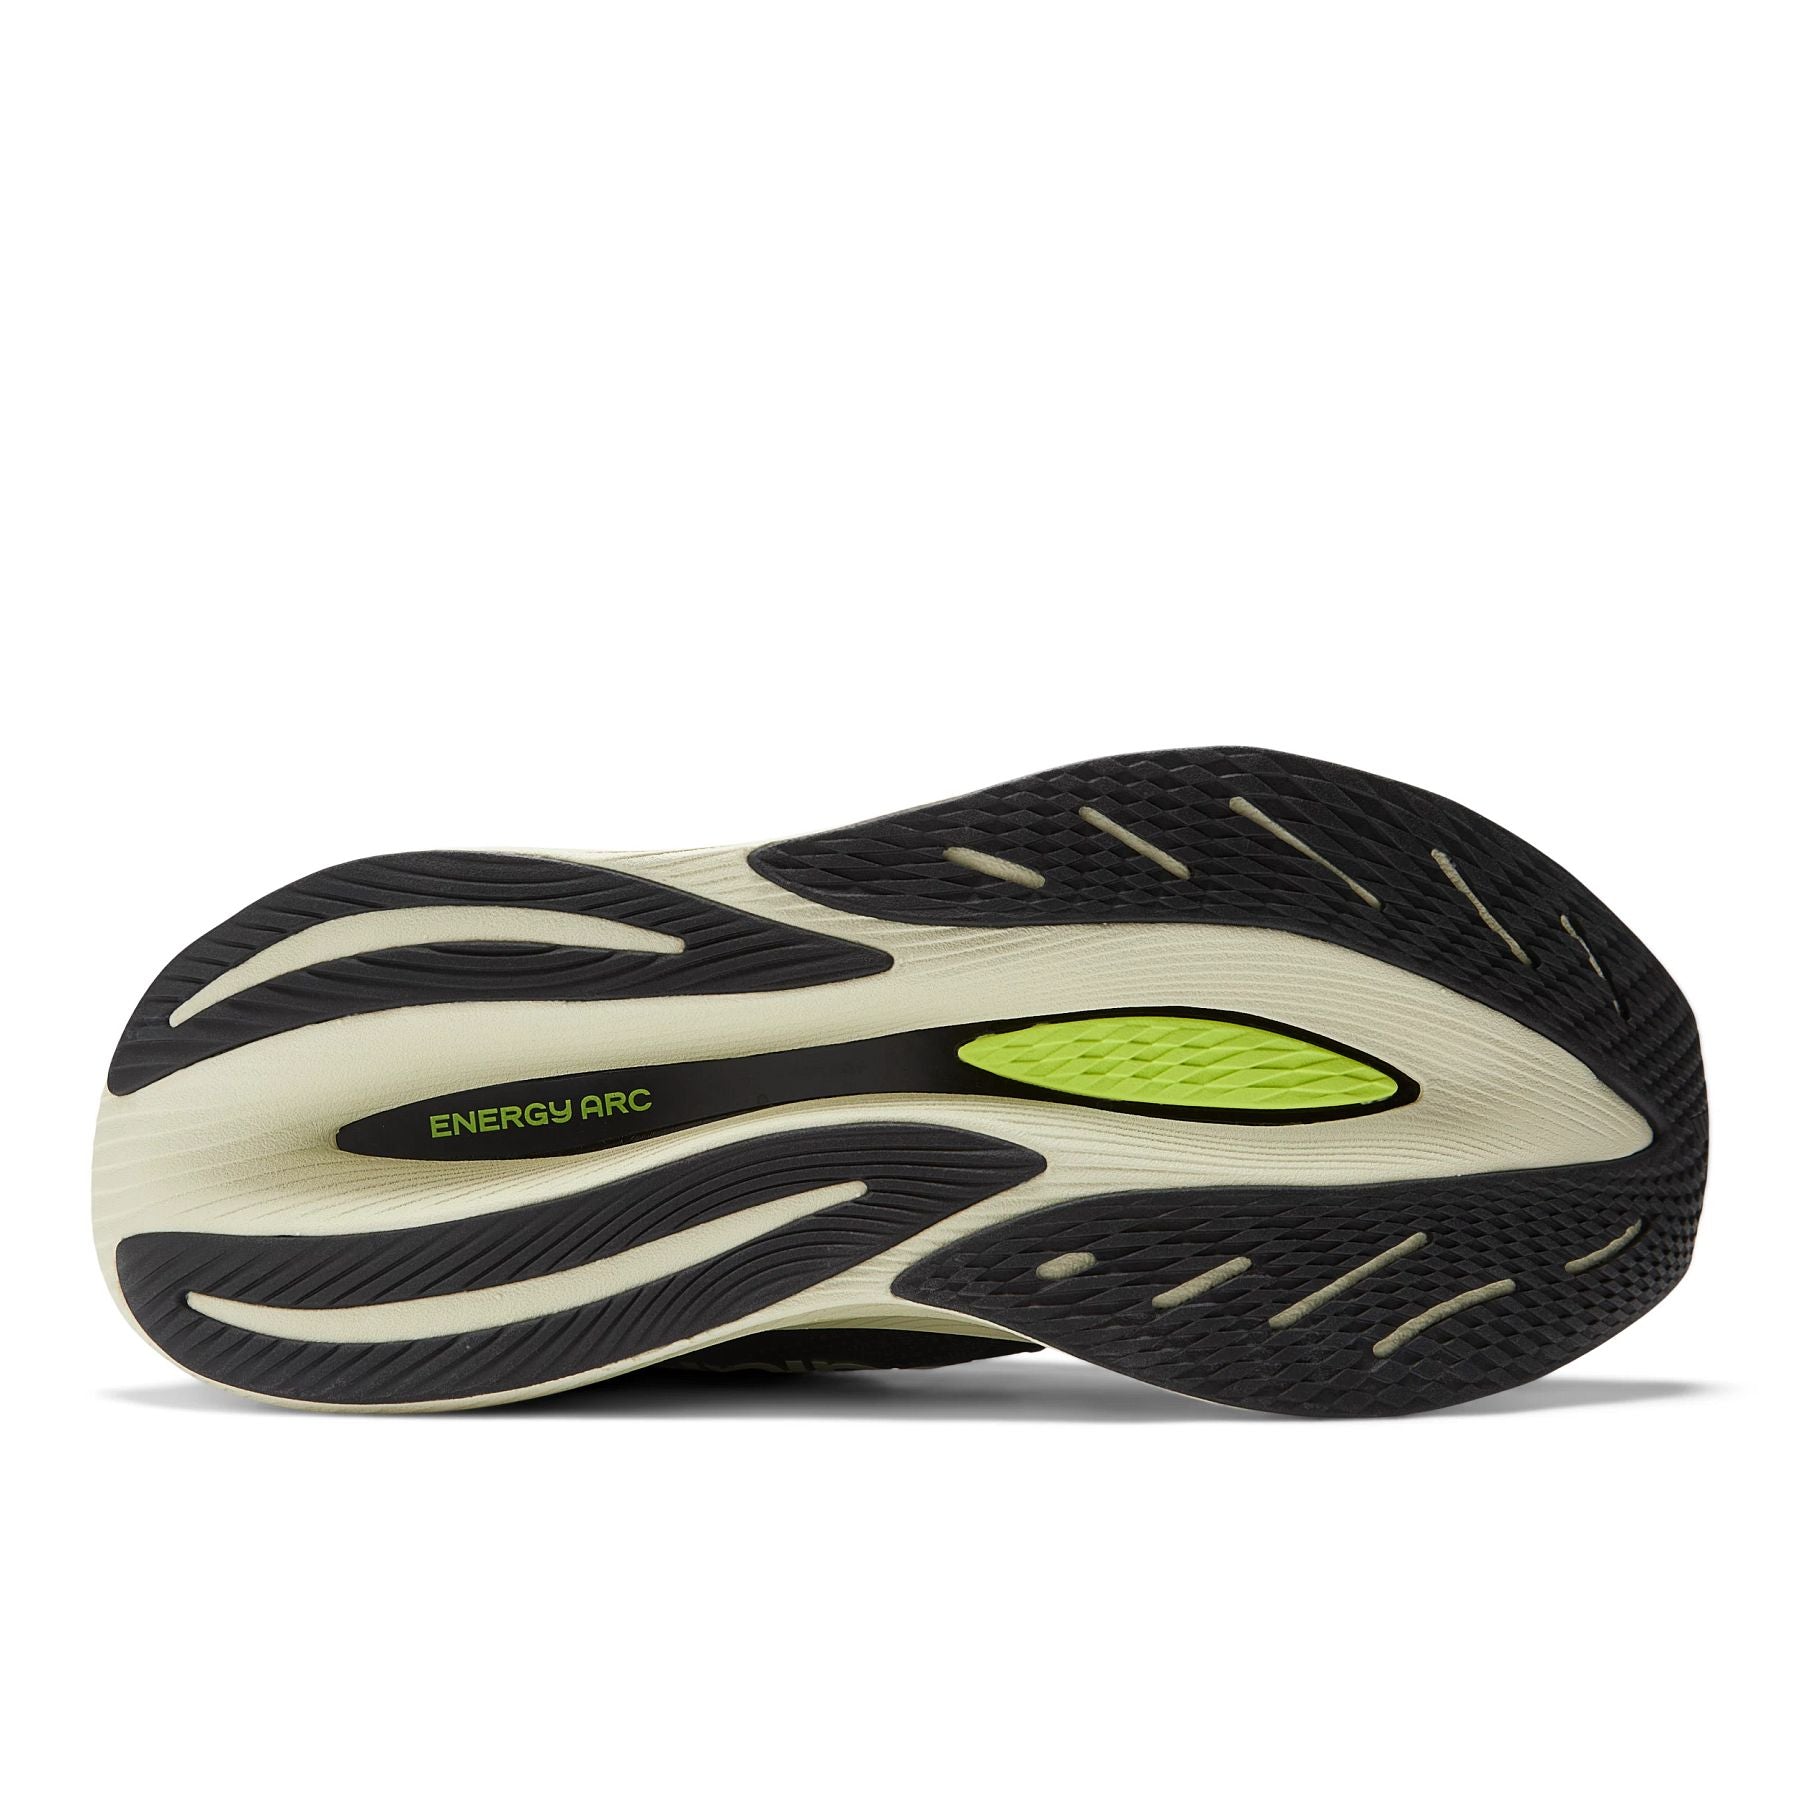 Bottom (outer sole) view of the Women's Fuel Cell SuperComp trainer in the color Black/Thirty Watt